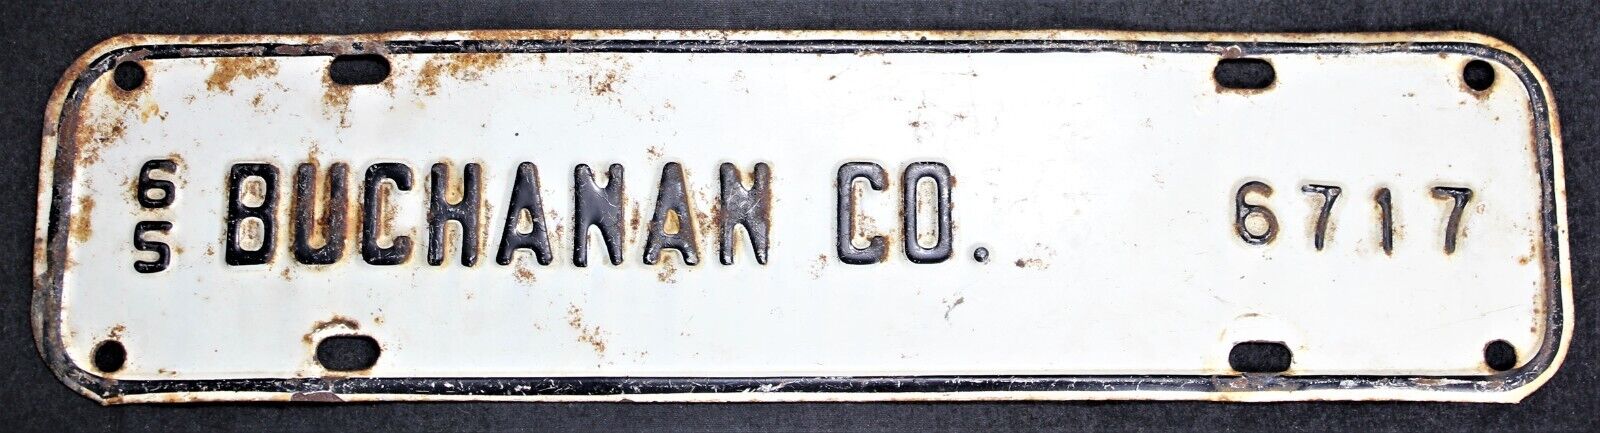 1965 Buchanan County Virginia License Plate - Town Tag - City Topper - Vintage